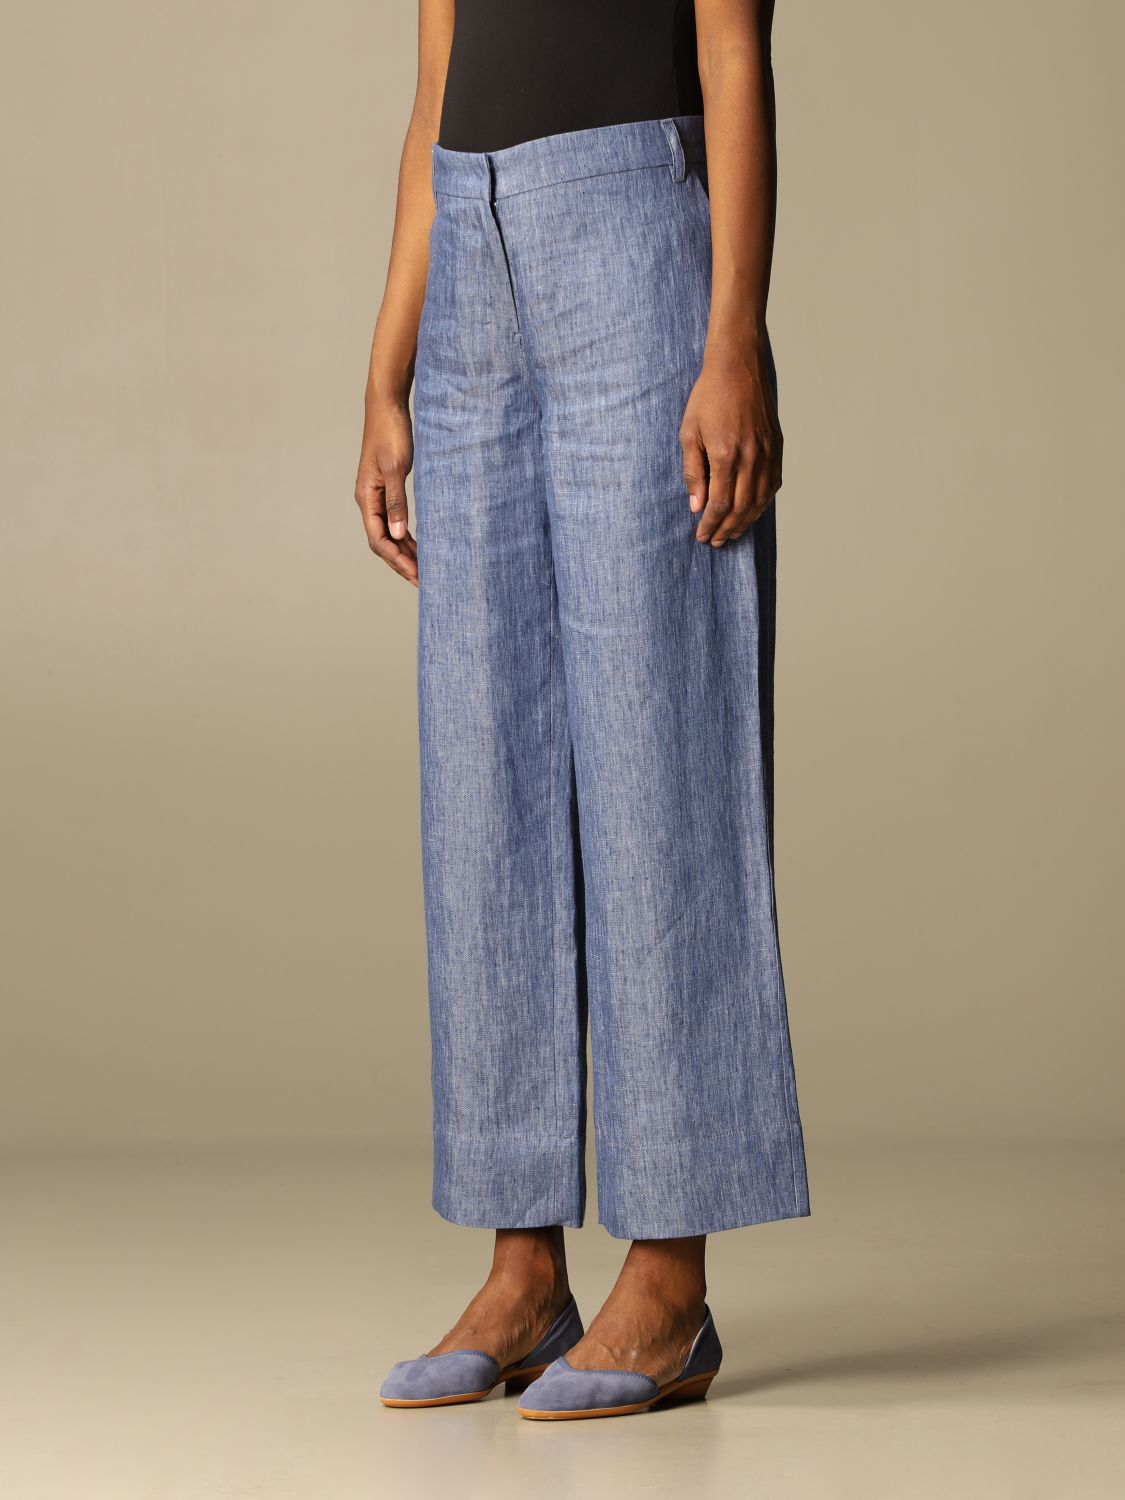 S MAX MARA: trousers in washed linen - Blue | S Max Mara pants ...